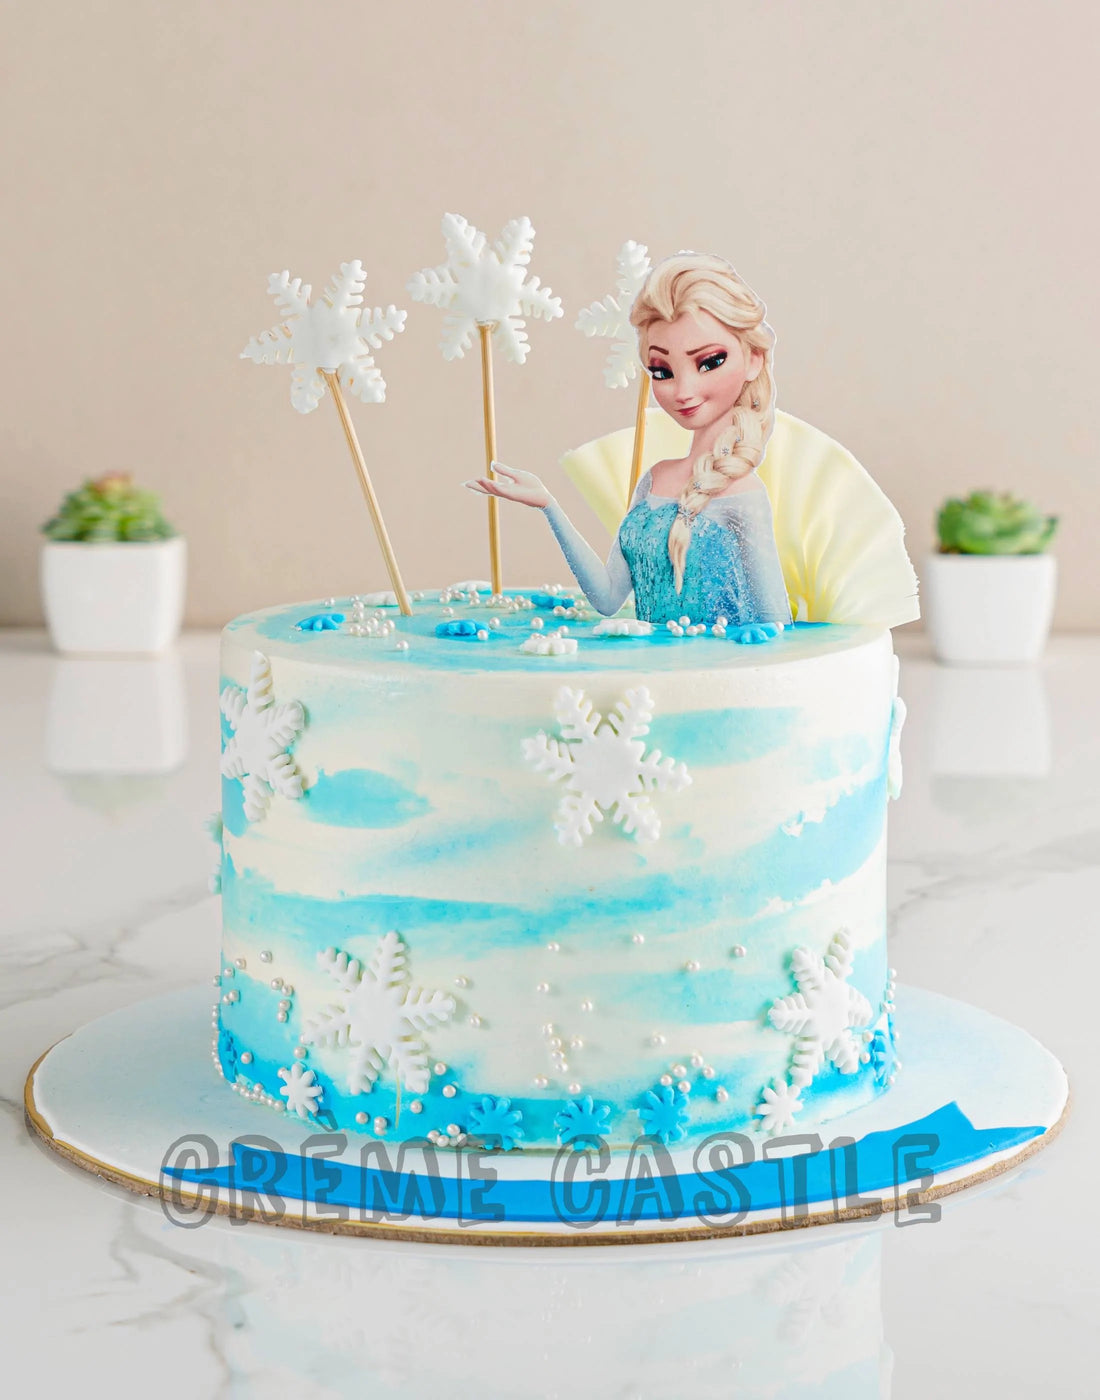 Frozen Theme Cake with Shading by Creme Castle